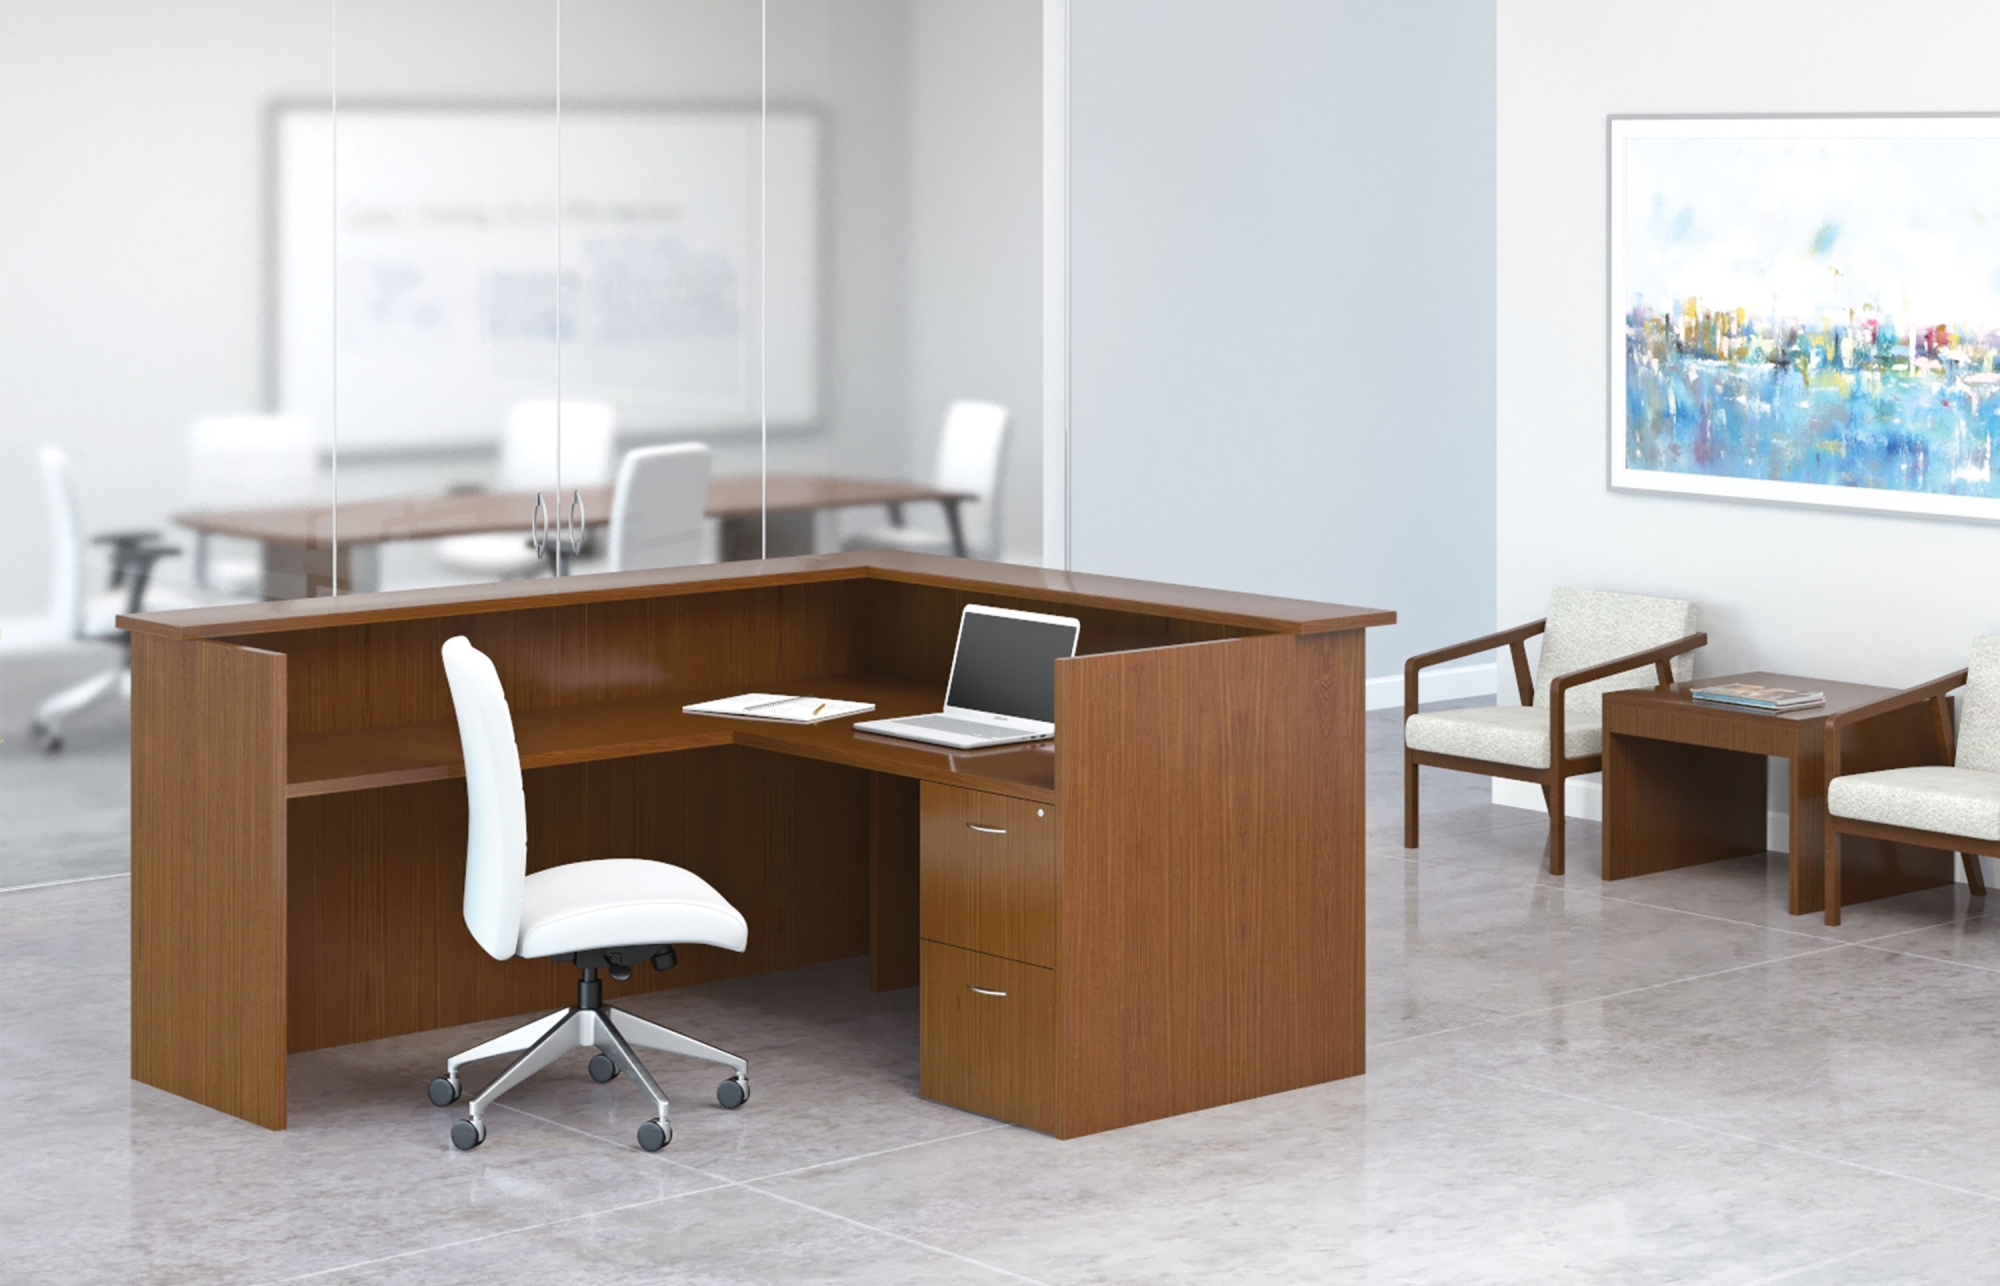 Indiana Furniture, Desks + Workstations, Filing + Storage, Welcoming environments start with furniture that’s warm and